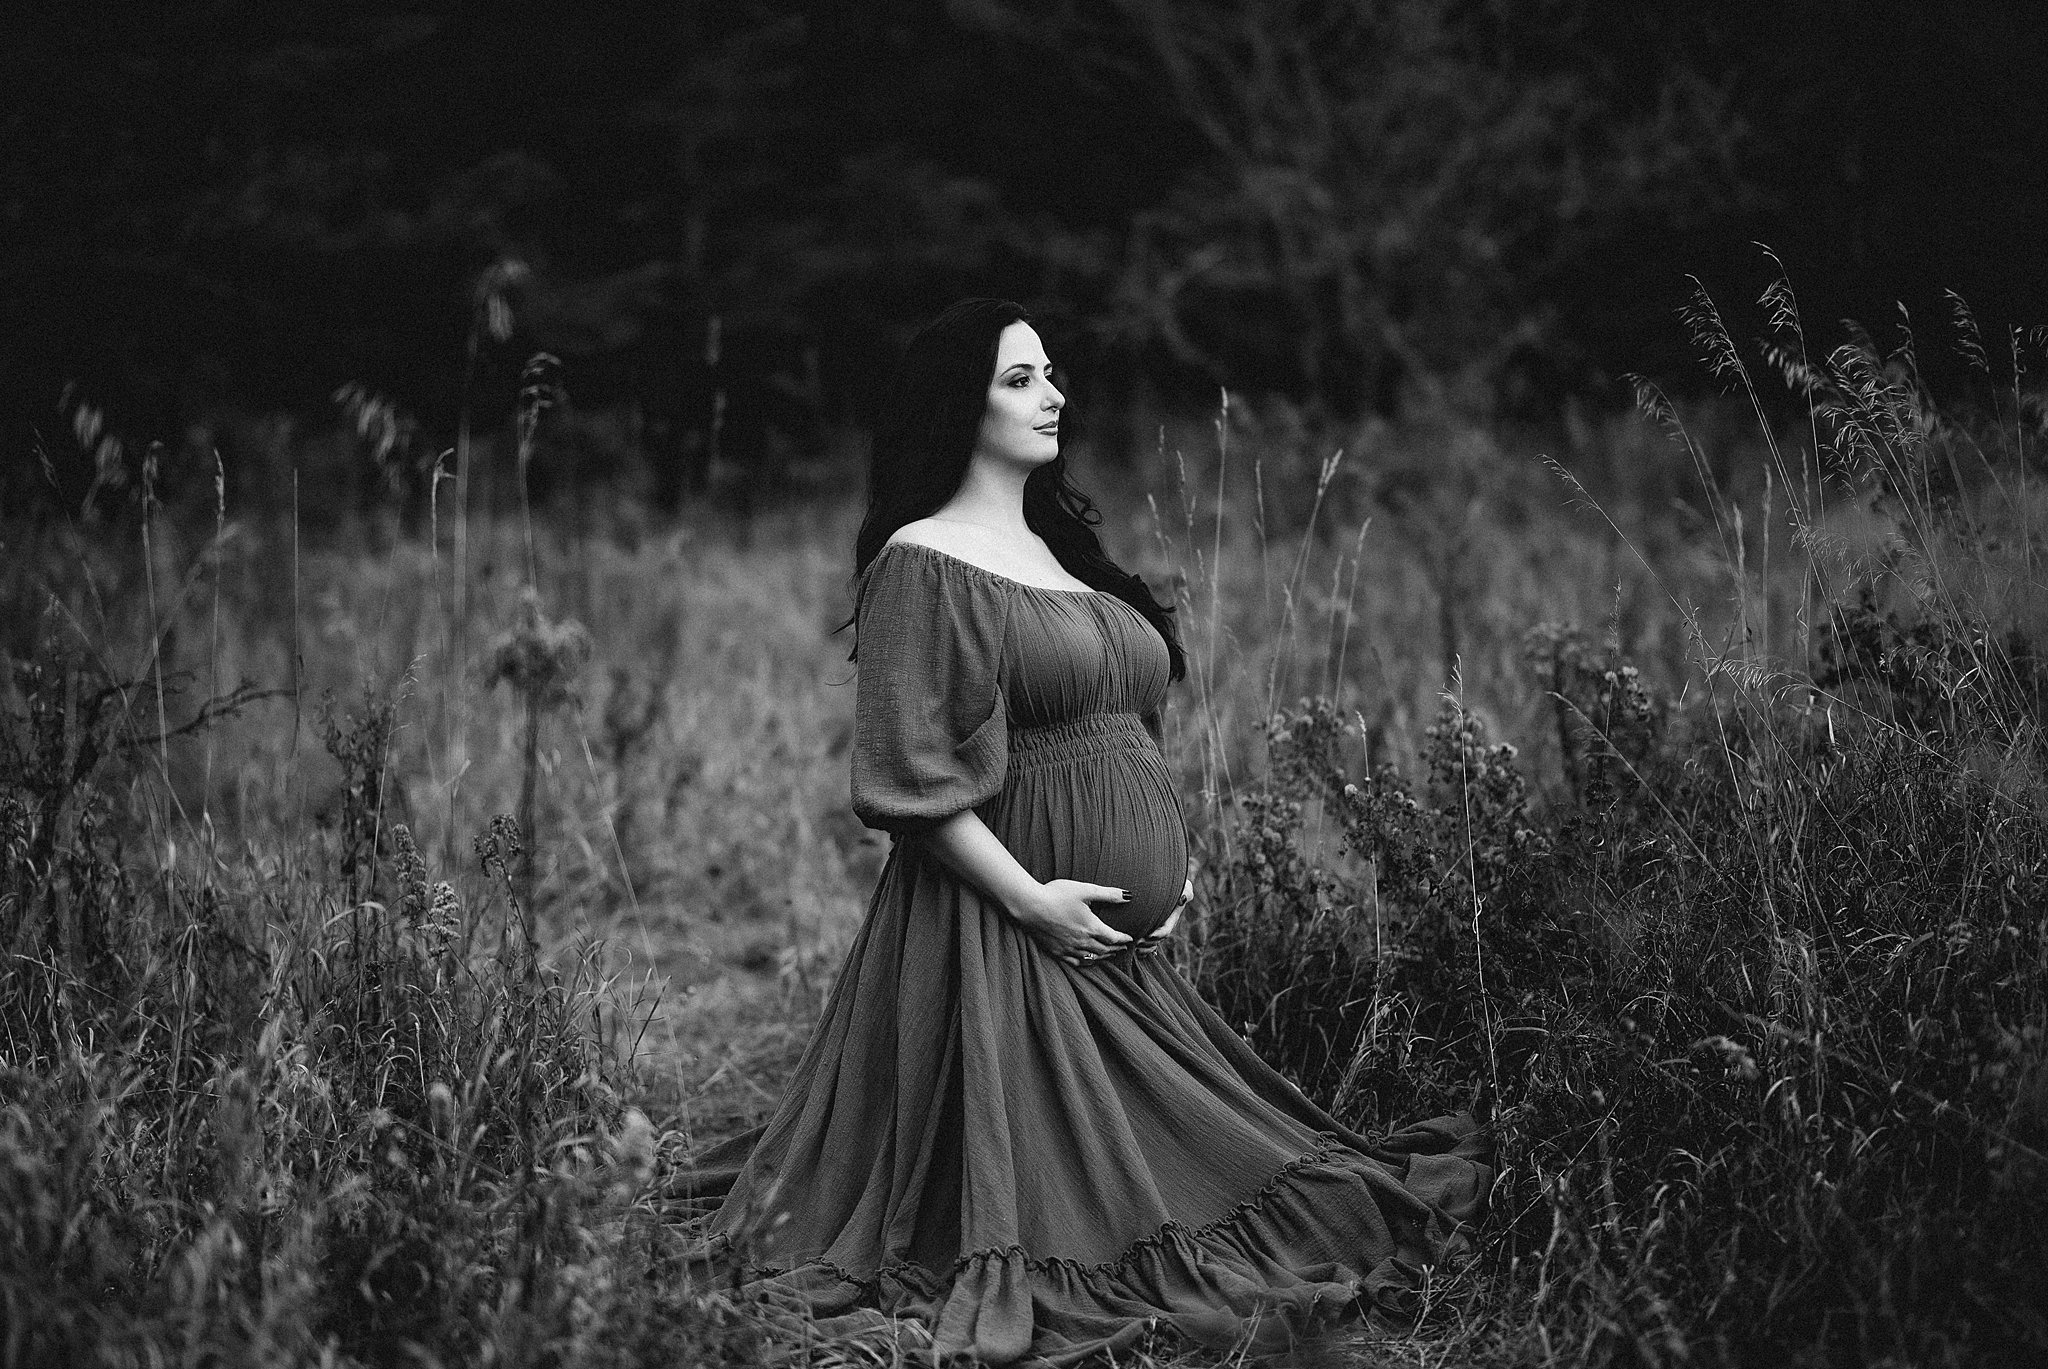 A mother to be kneels in a grassy field in a dark maternity dress surrounded by tall grass hautemama